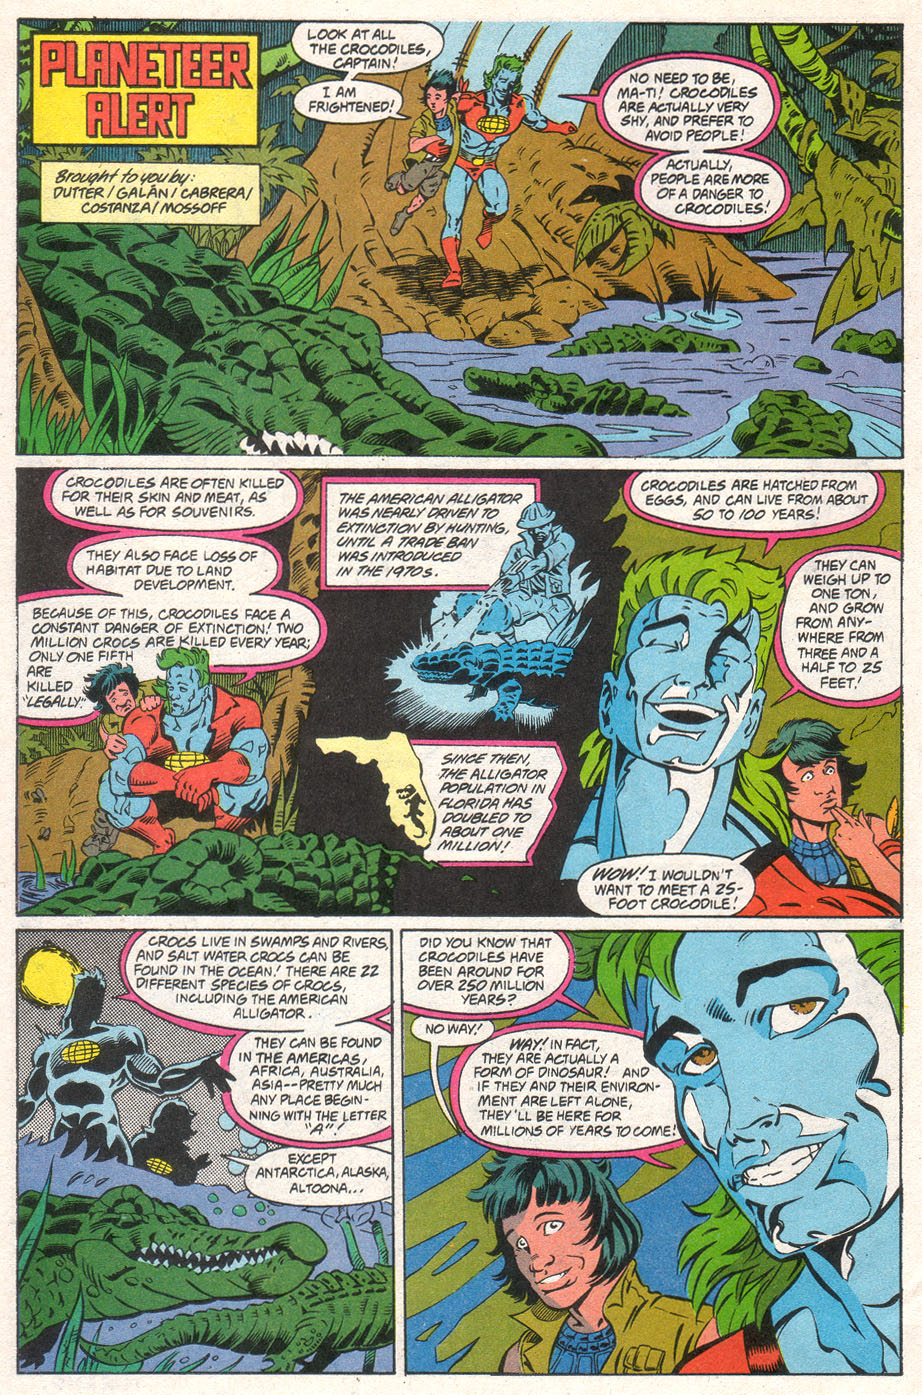 Captain Planet and the Planeteers 12 Page 14